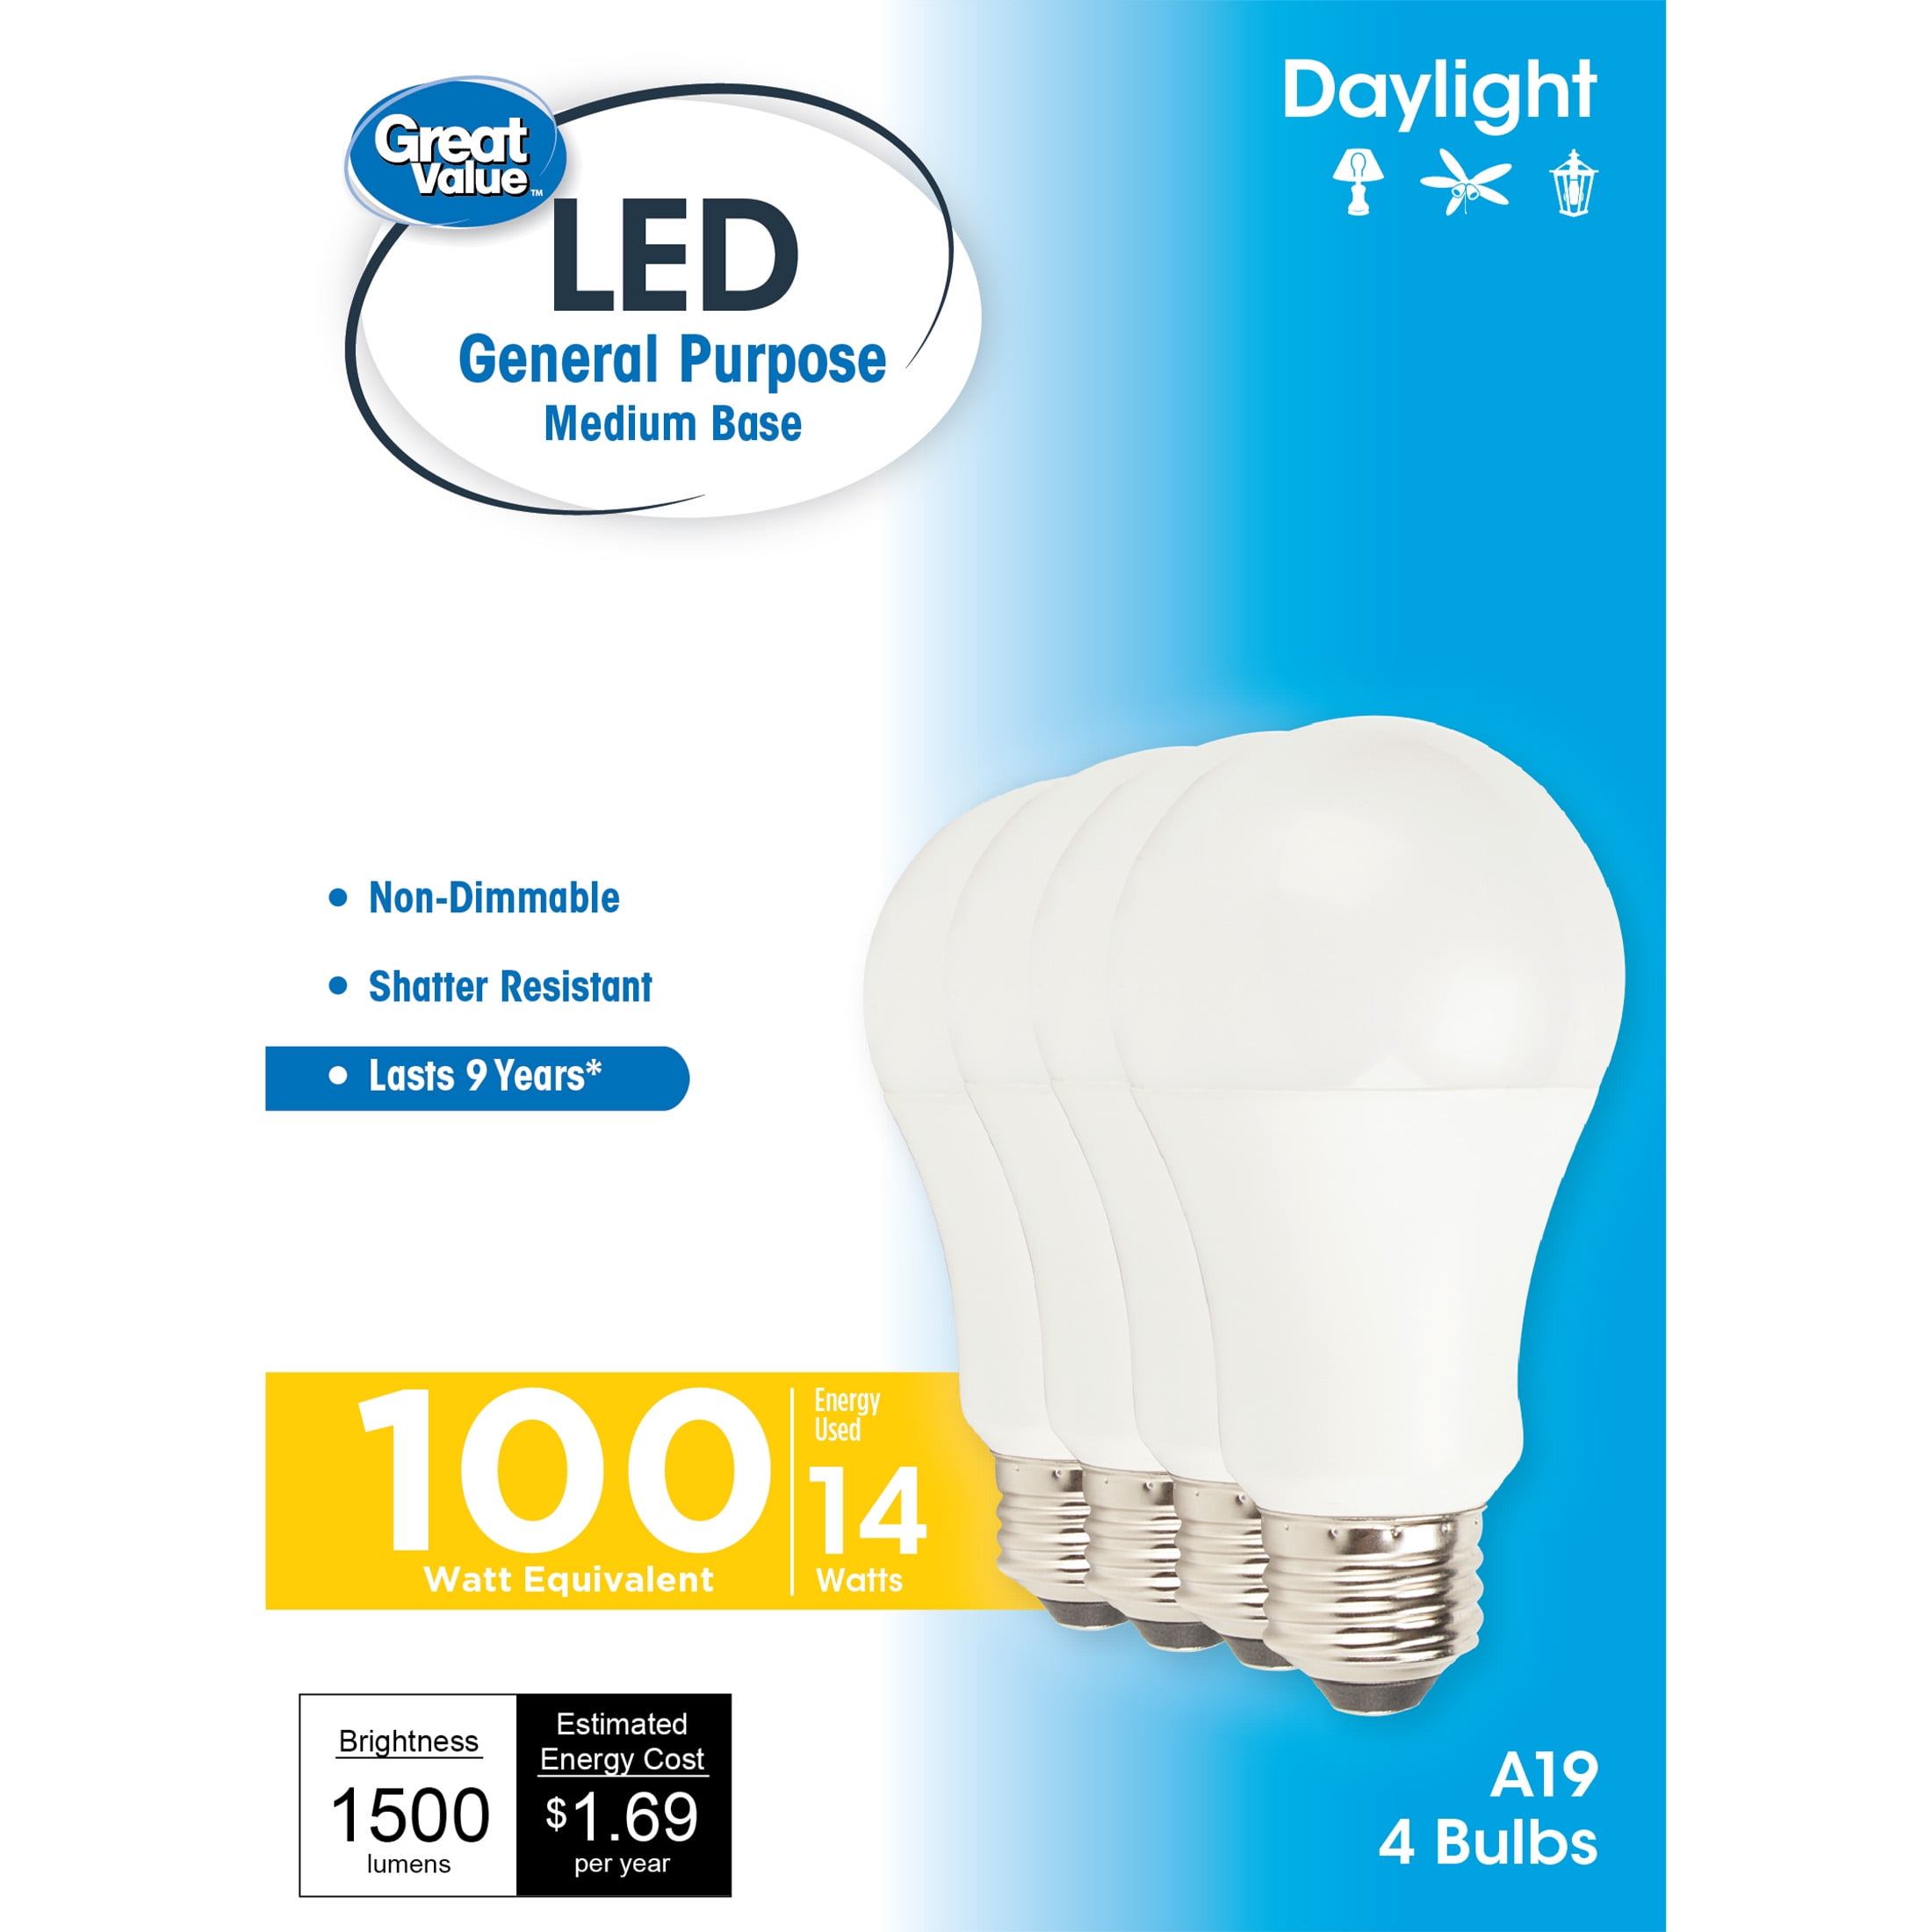 Great Value LED Light Bulb, 14 Watts (100W Equivalent) A19 General Purpose Lamp E26 Medium Base, Non-dimmable, Daylight, 4-Pack